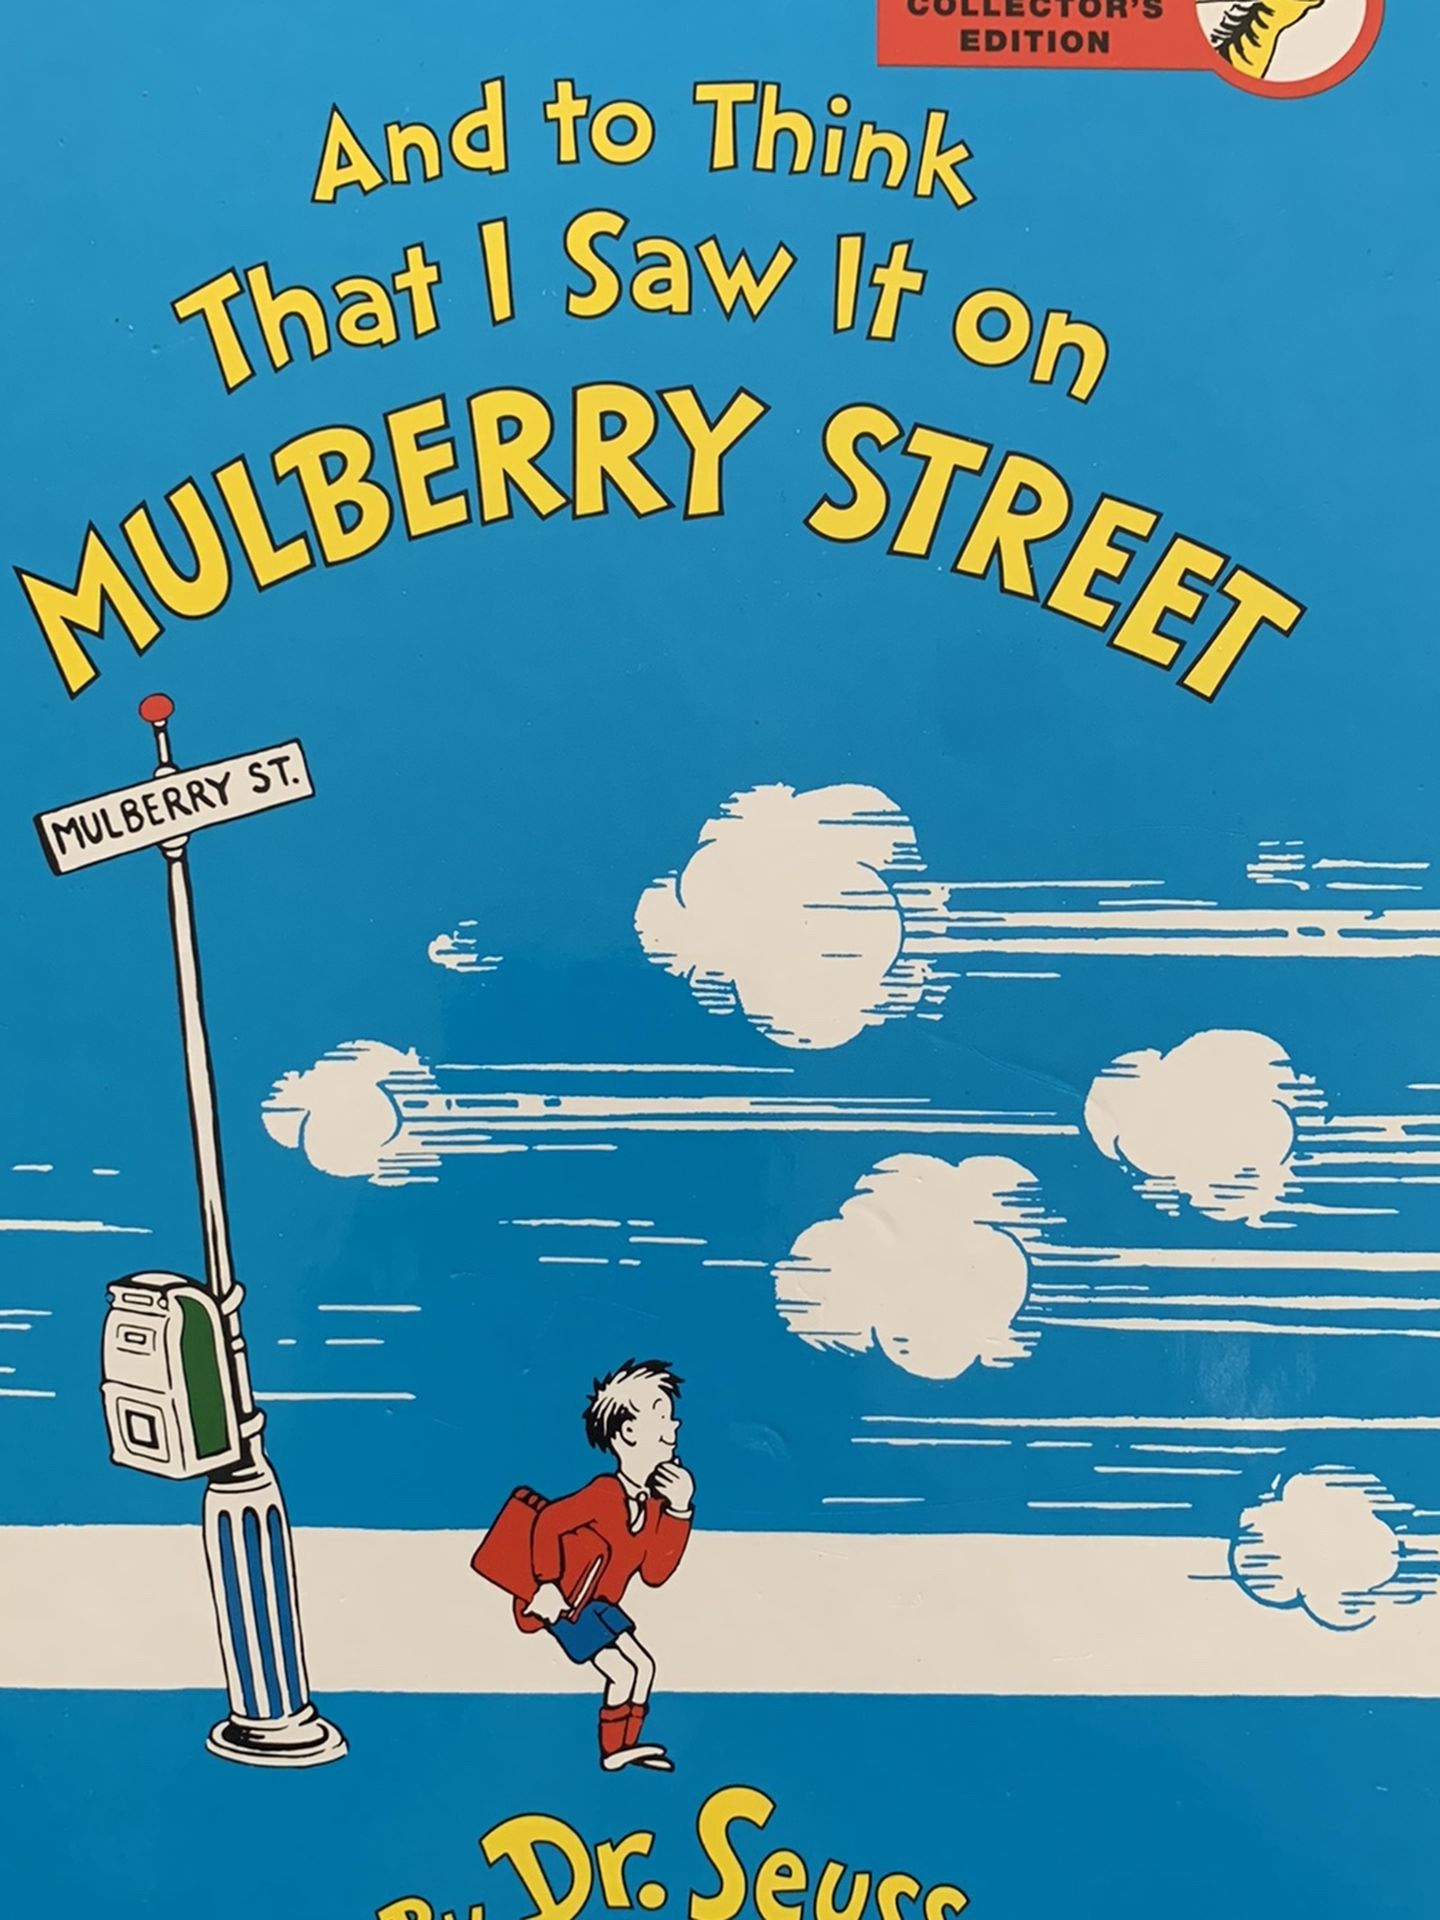 And To Think That I Saw It On Mulberry Street by Dr Seuss 2010 Kohl’s Cares